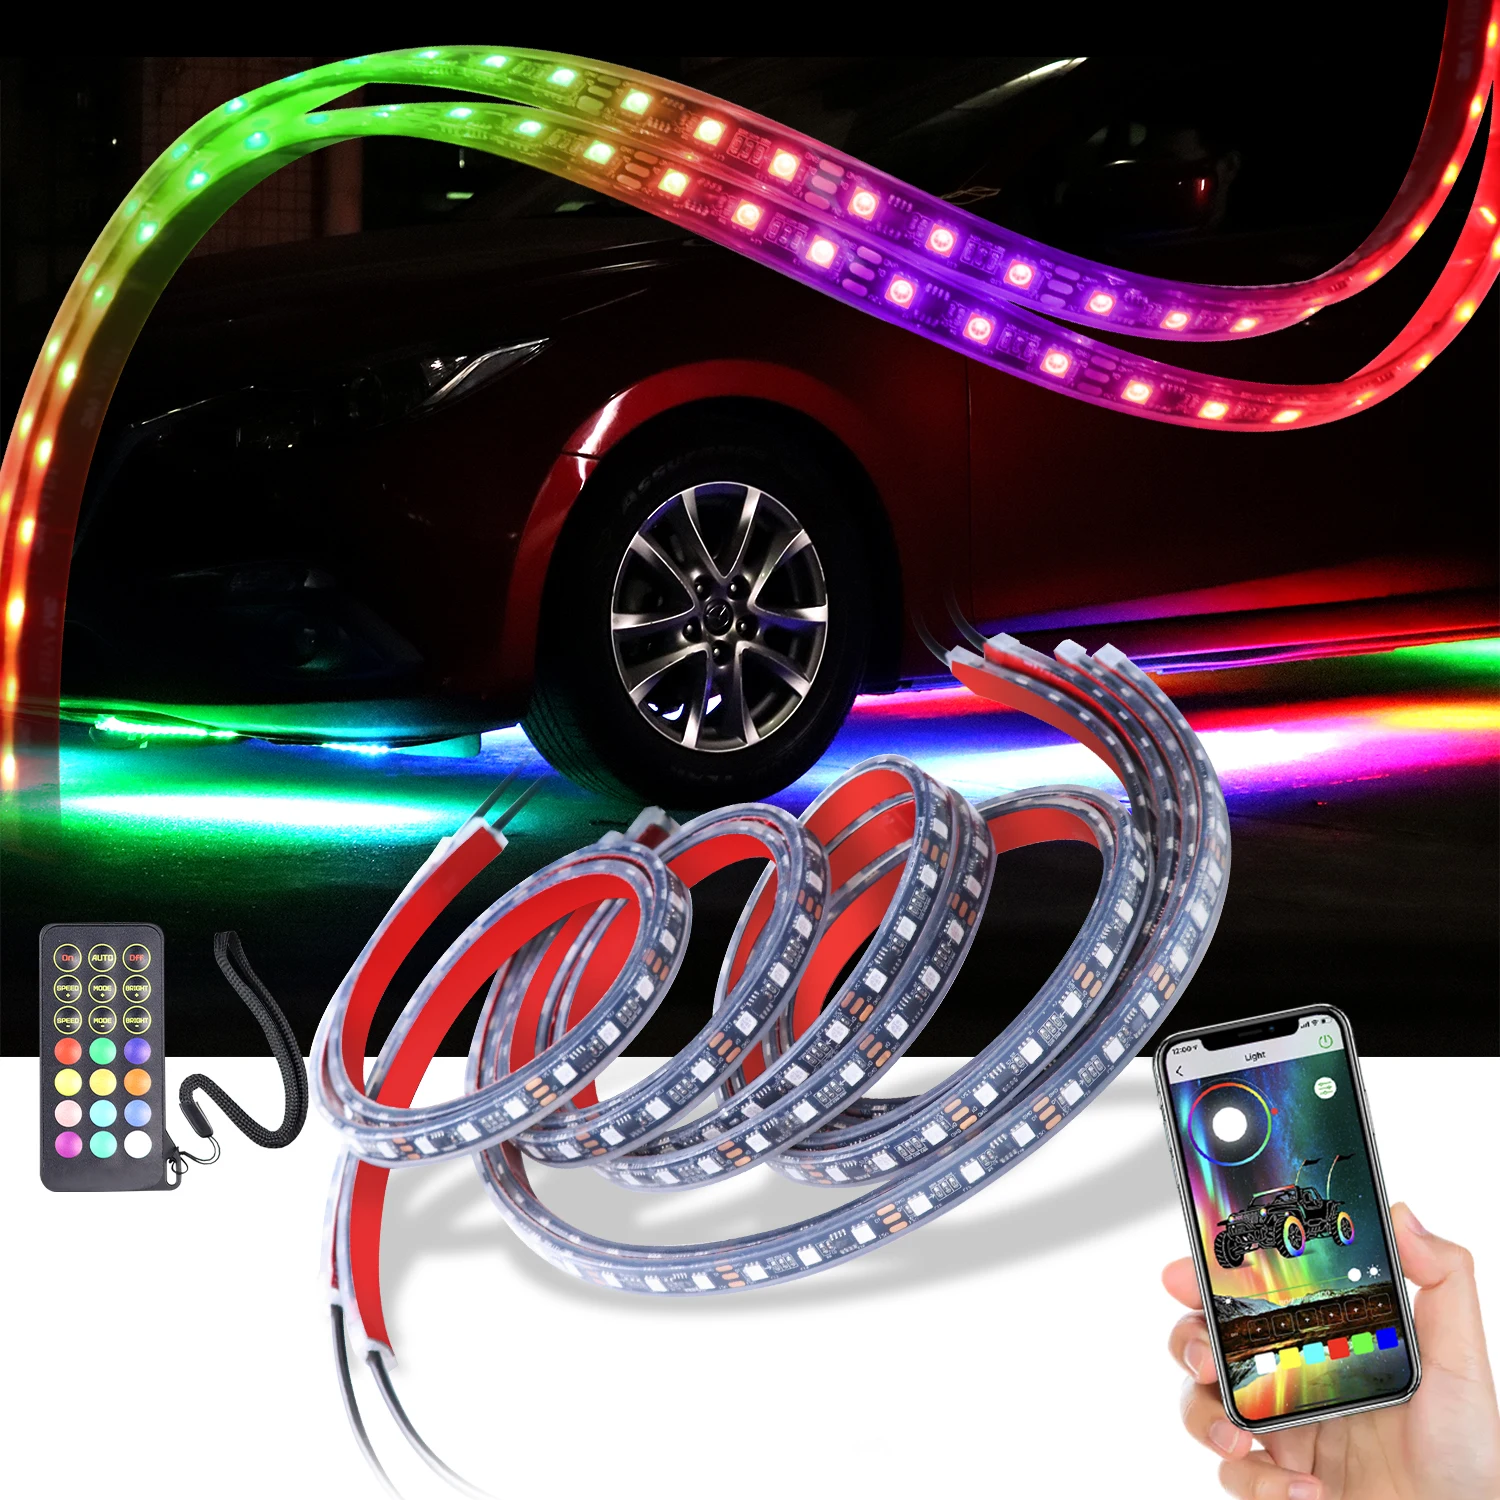 Car Underglow Lights Ultra Long LED Car Lights Exterior Waterproof 2-in-1 Design App Control Under Glow Kit for Cars Trucks Sync to Music Neon 16 Million Colors DC 12-Volt 